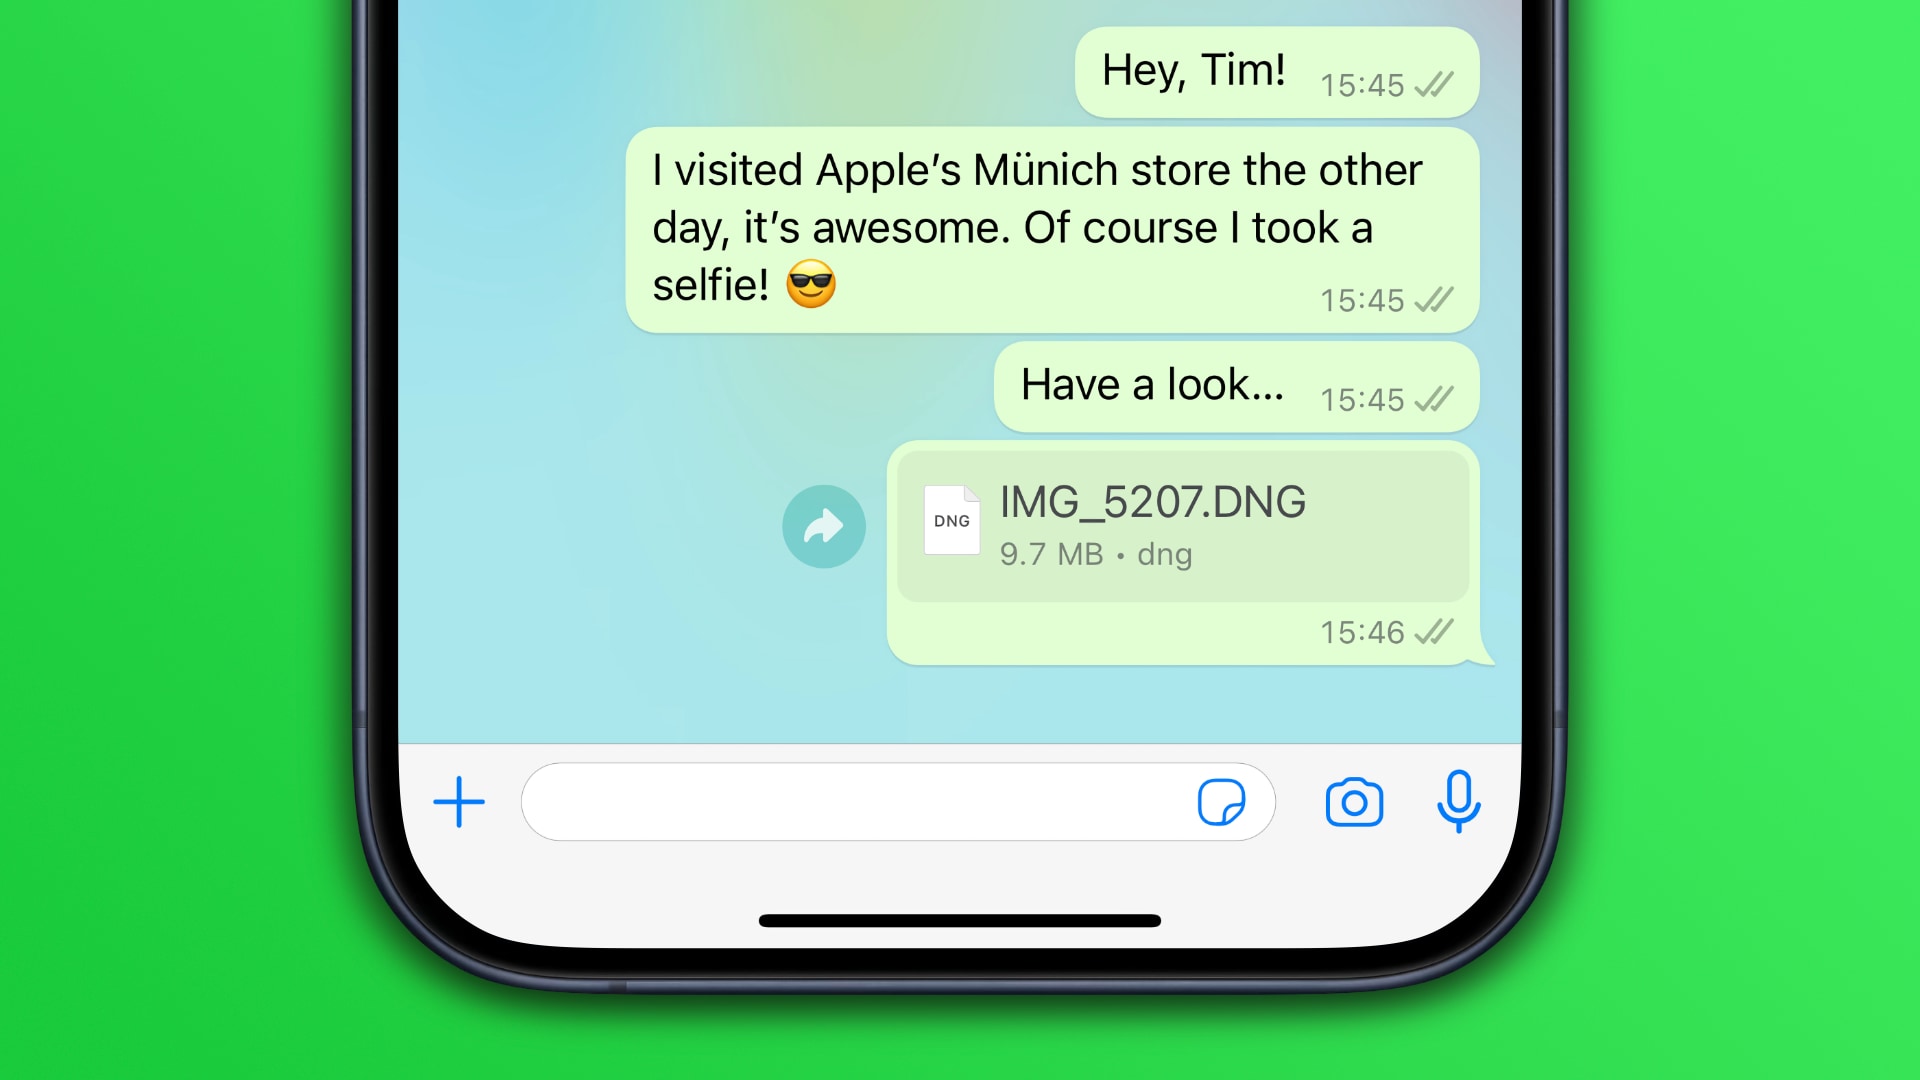 WhatsApp for iPhone: How to send full-resolution photos and videos to preserve their original quality